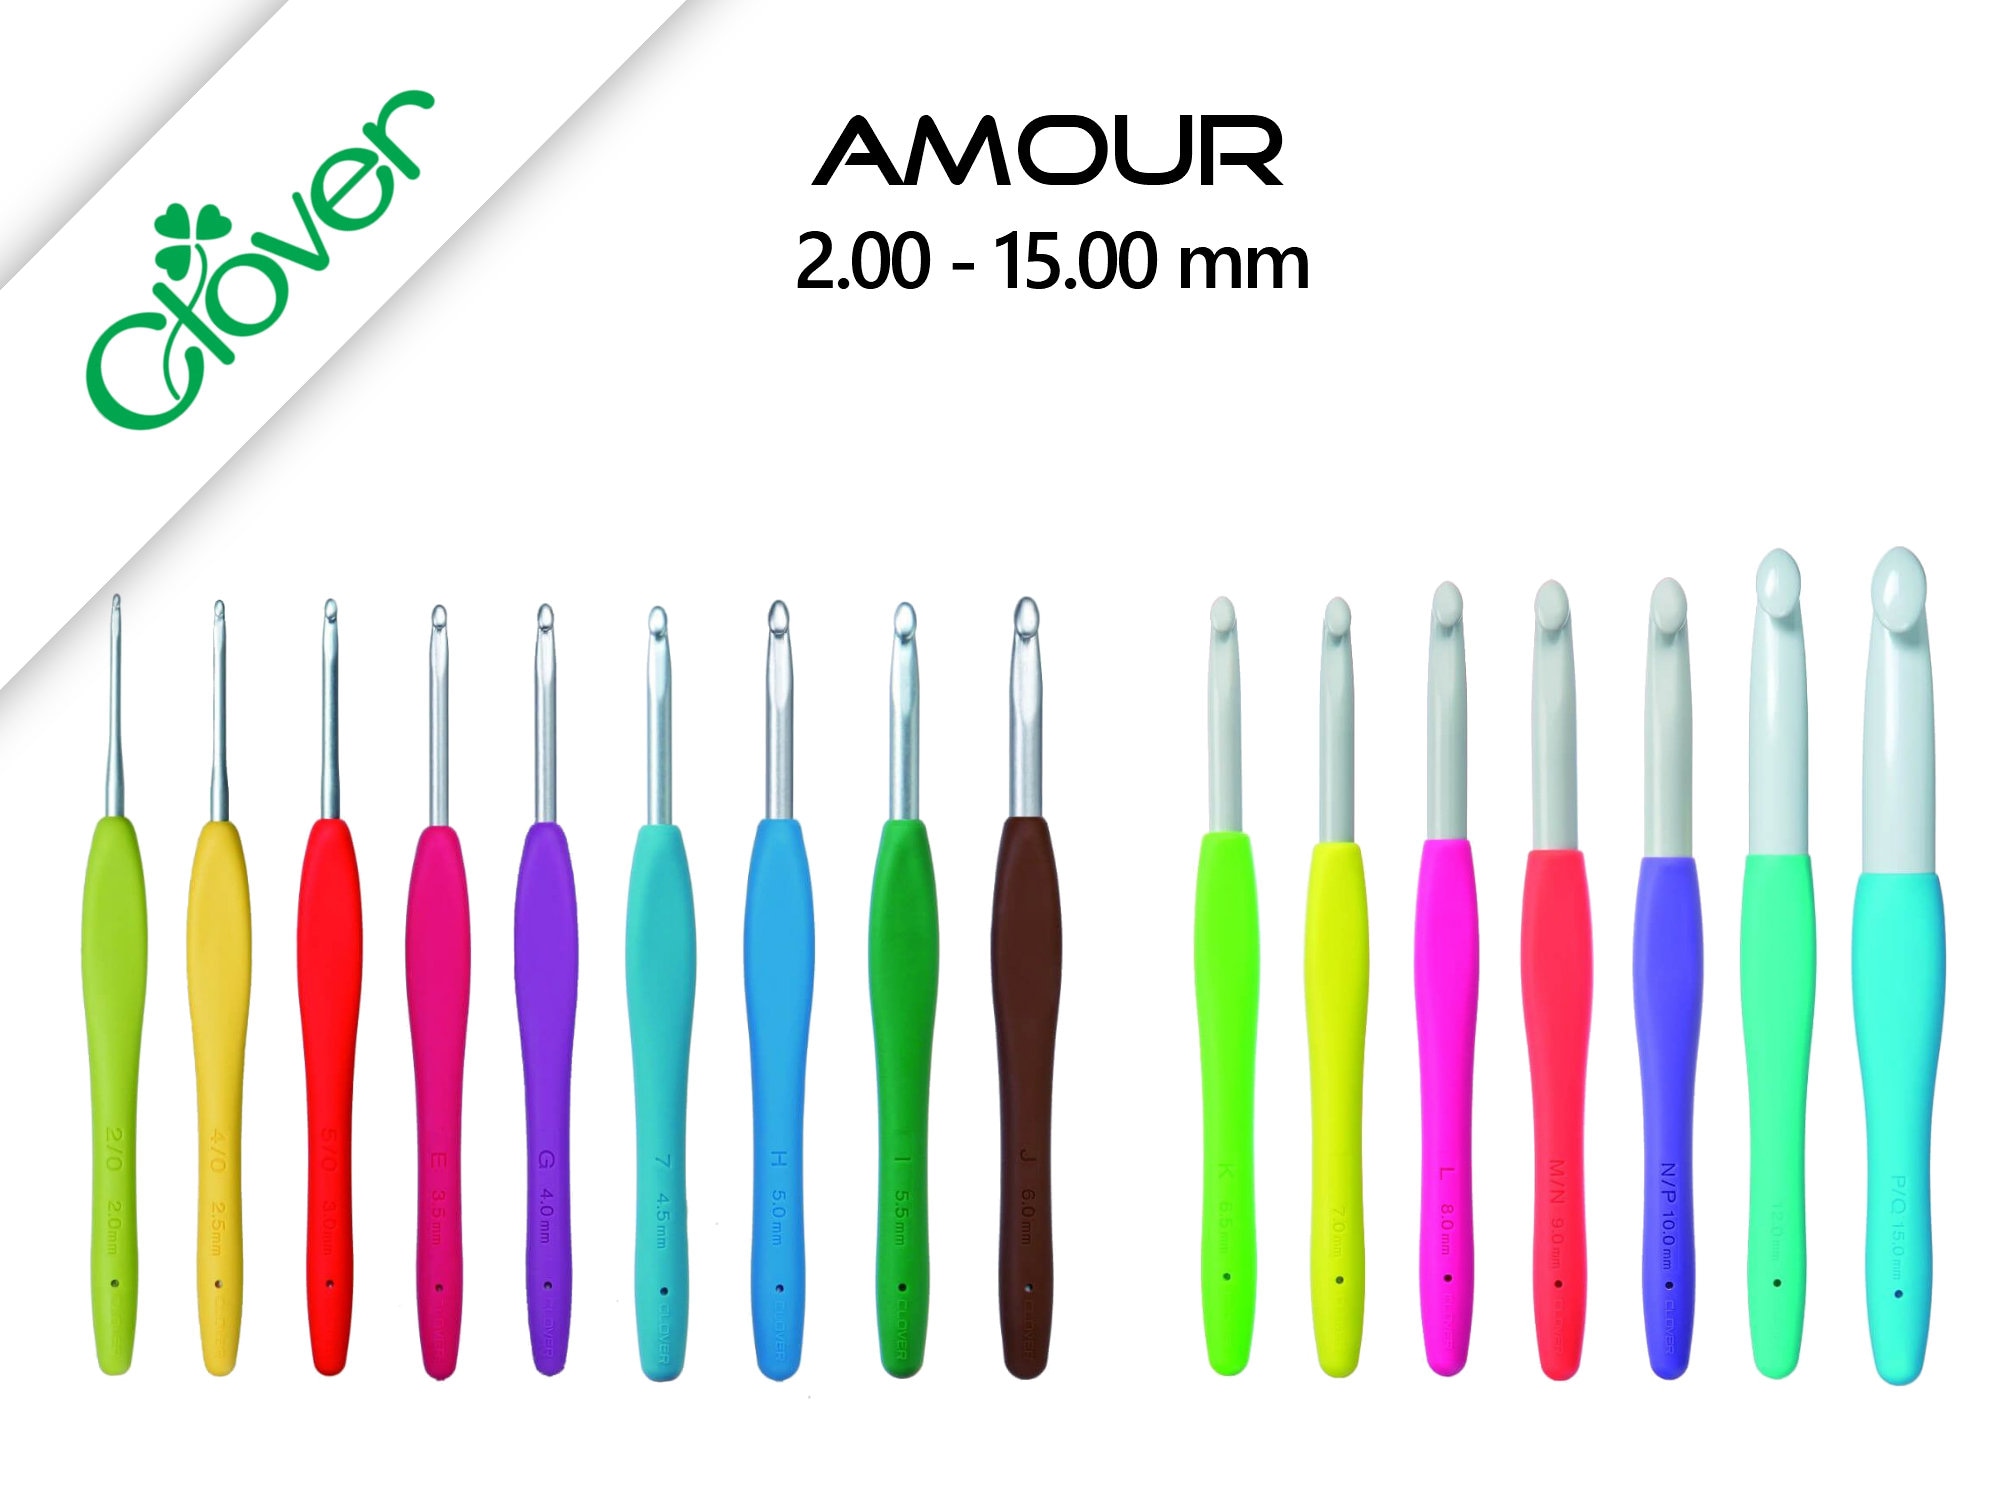 Crochet Hook Clover Amour Soft Touch Quality Crochet Hooks in 16 Sizes 2.00  Mm 15.00 Mm 